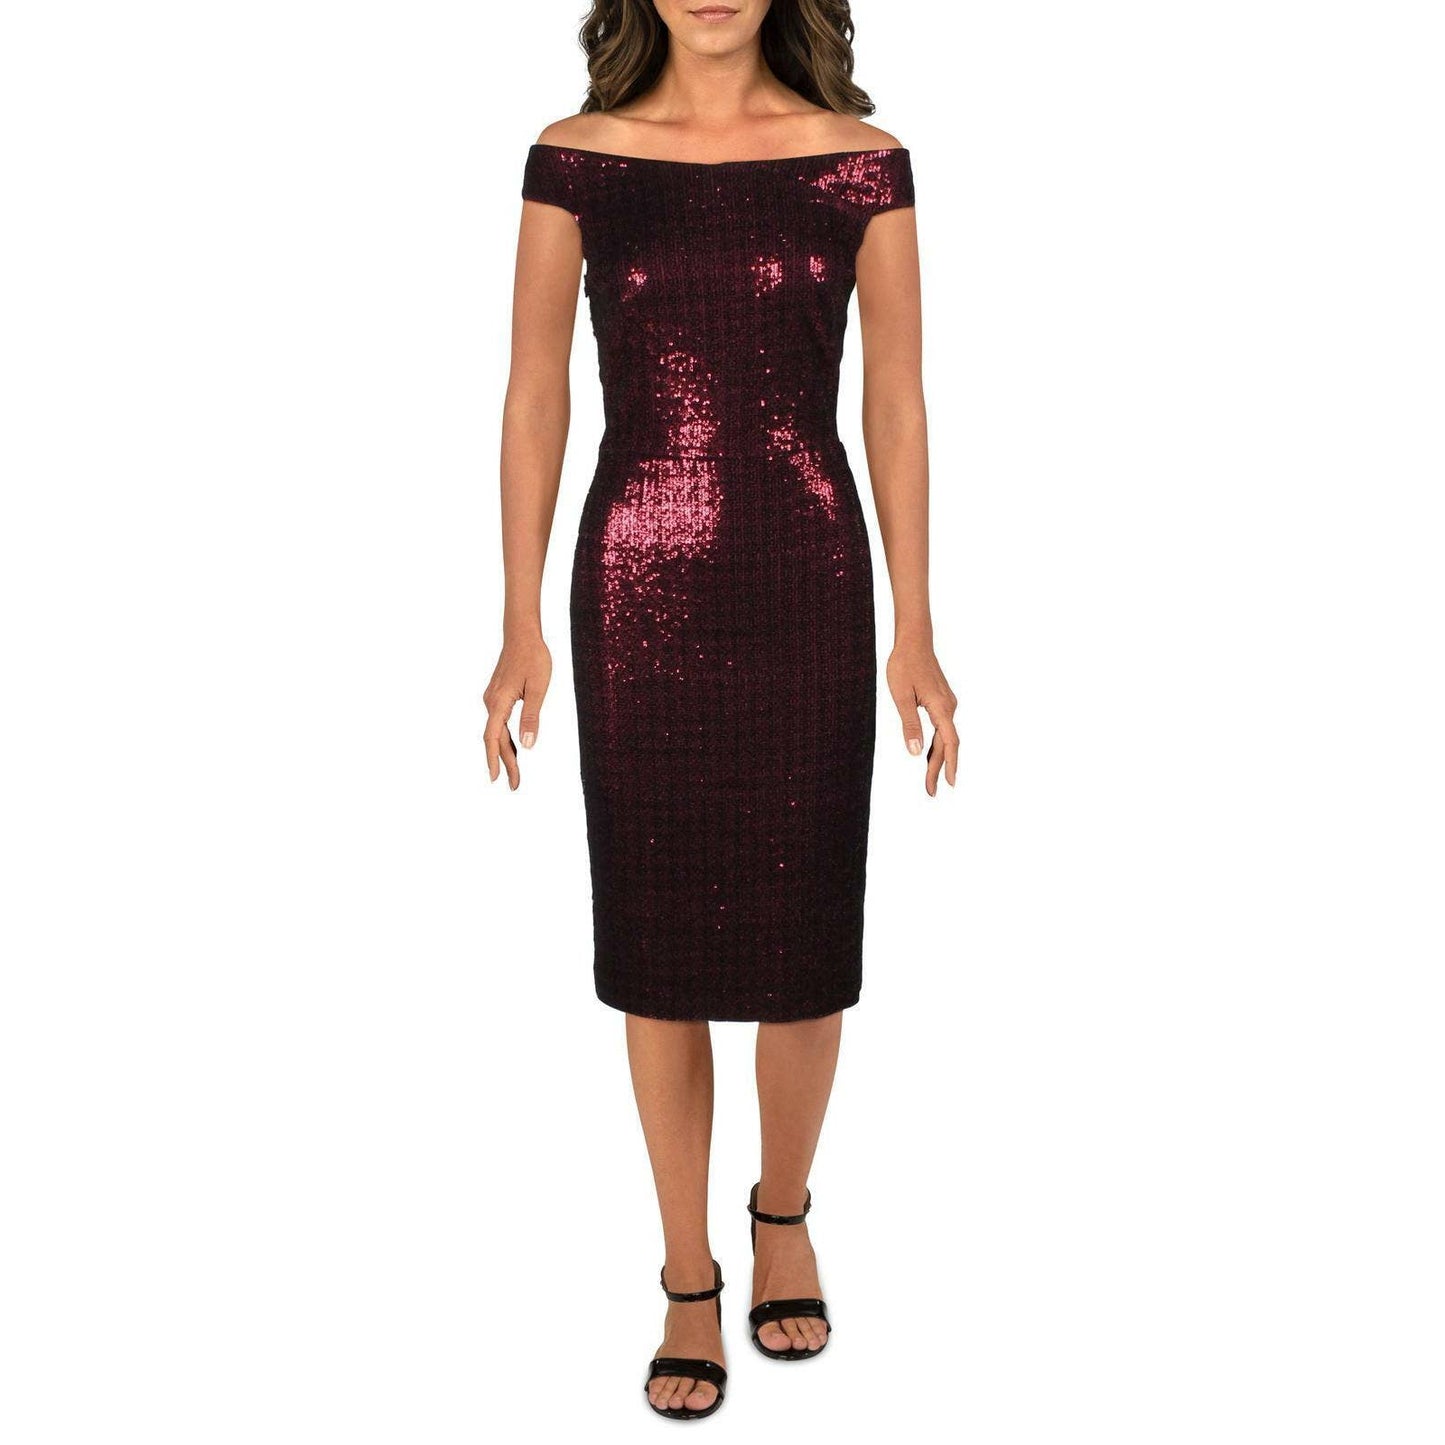 RALPH LAUREN MARALYSE SEQUINNED COCKTAIL DRESS, WINE RED 6P, NWT $185